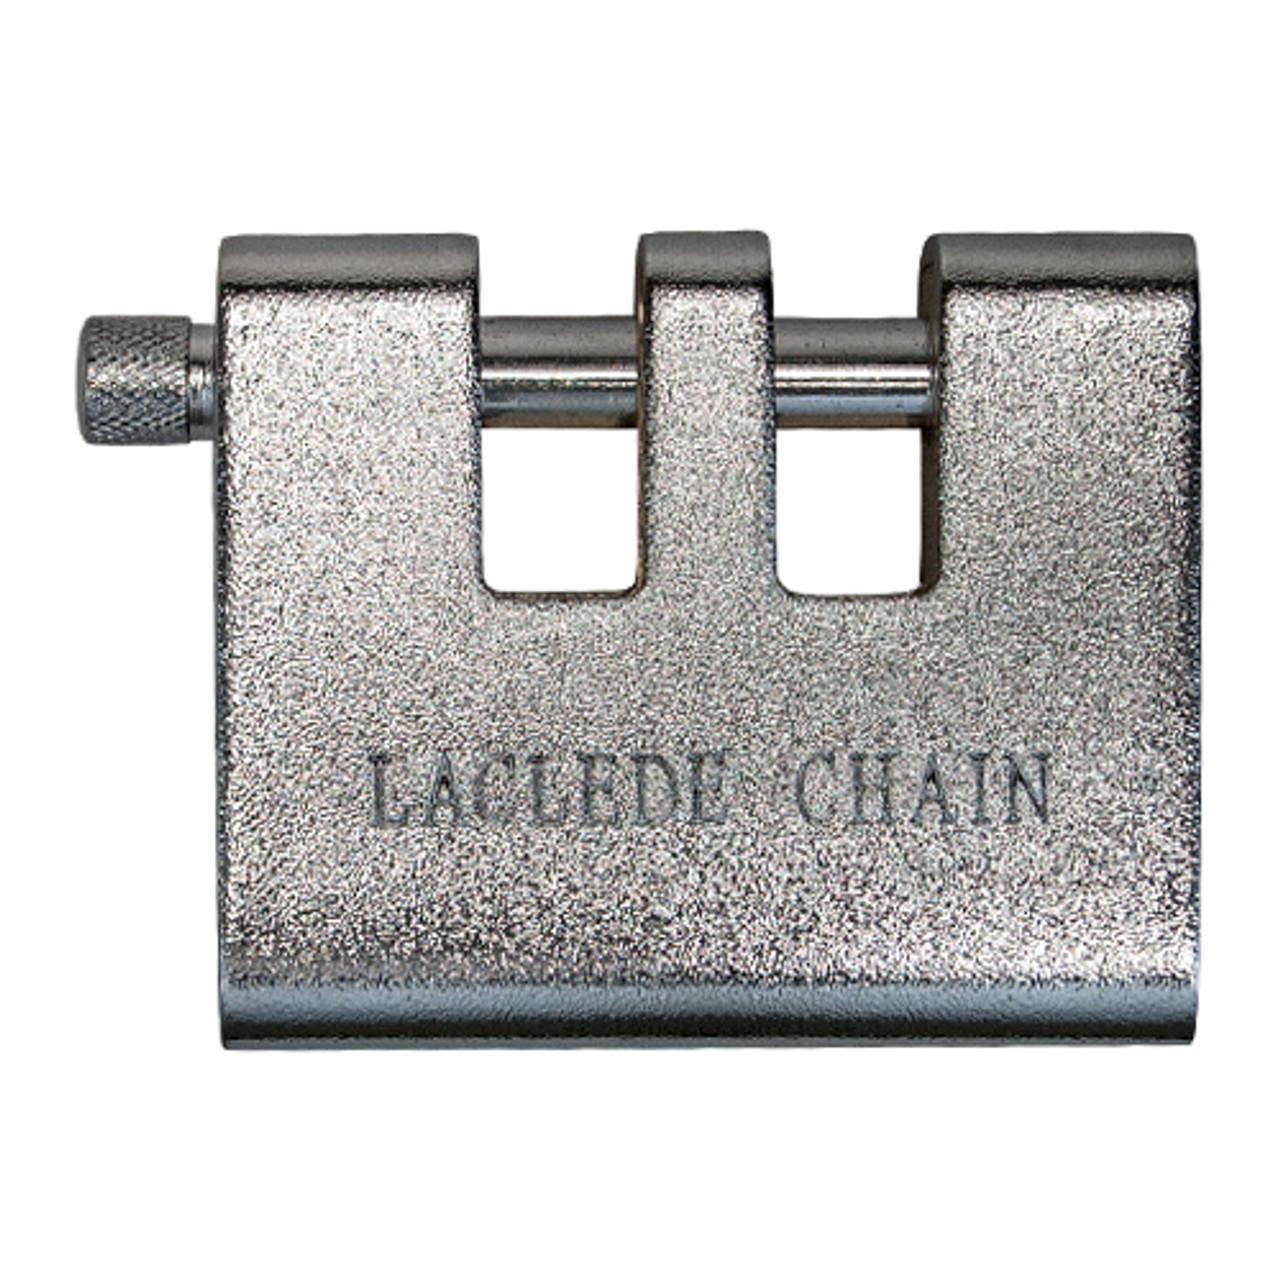 Laclede Security Chain Padlock - #8204-100-04